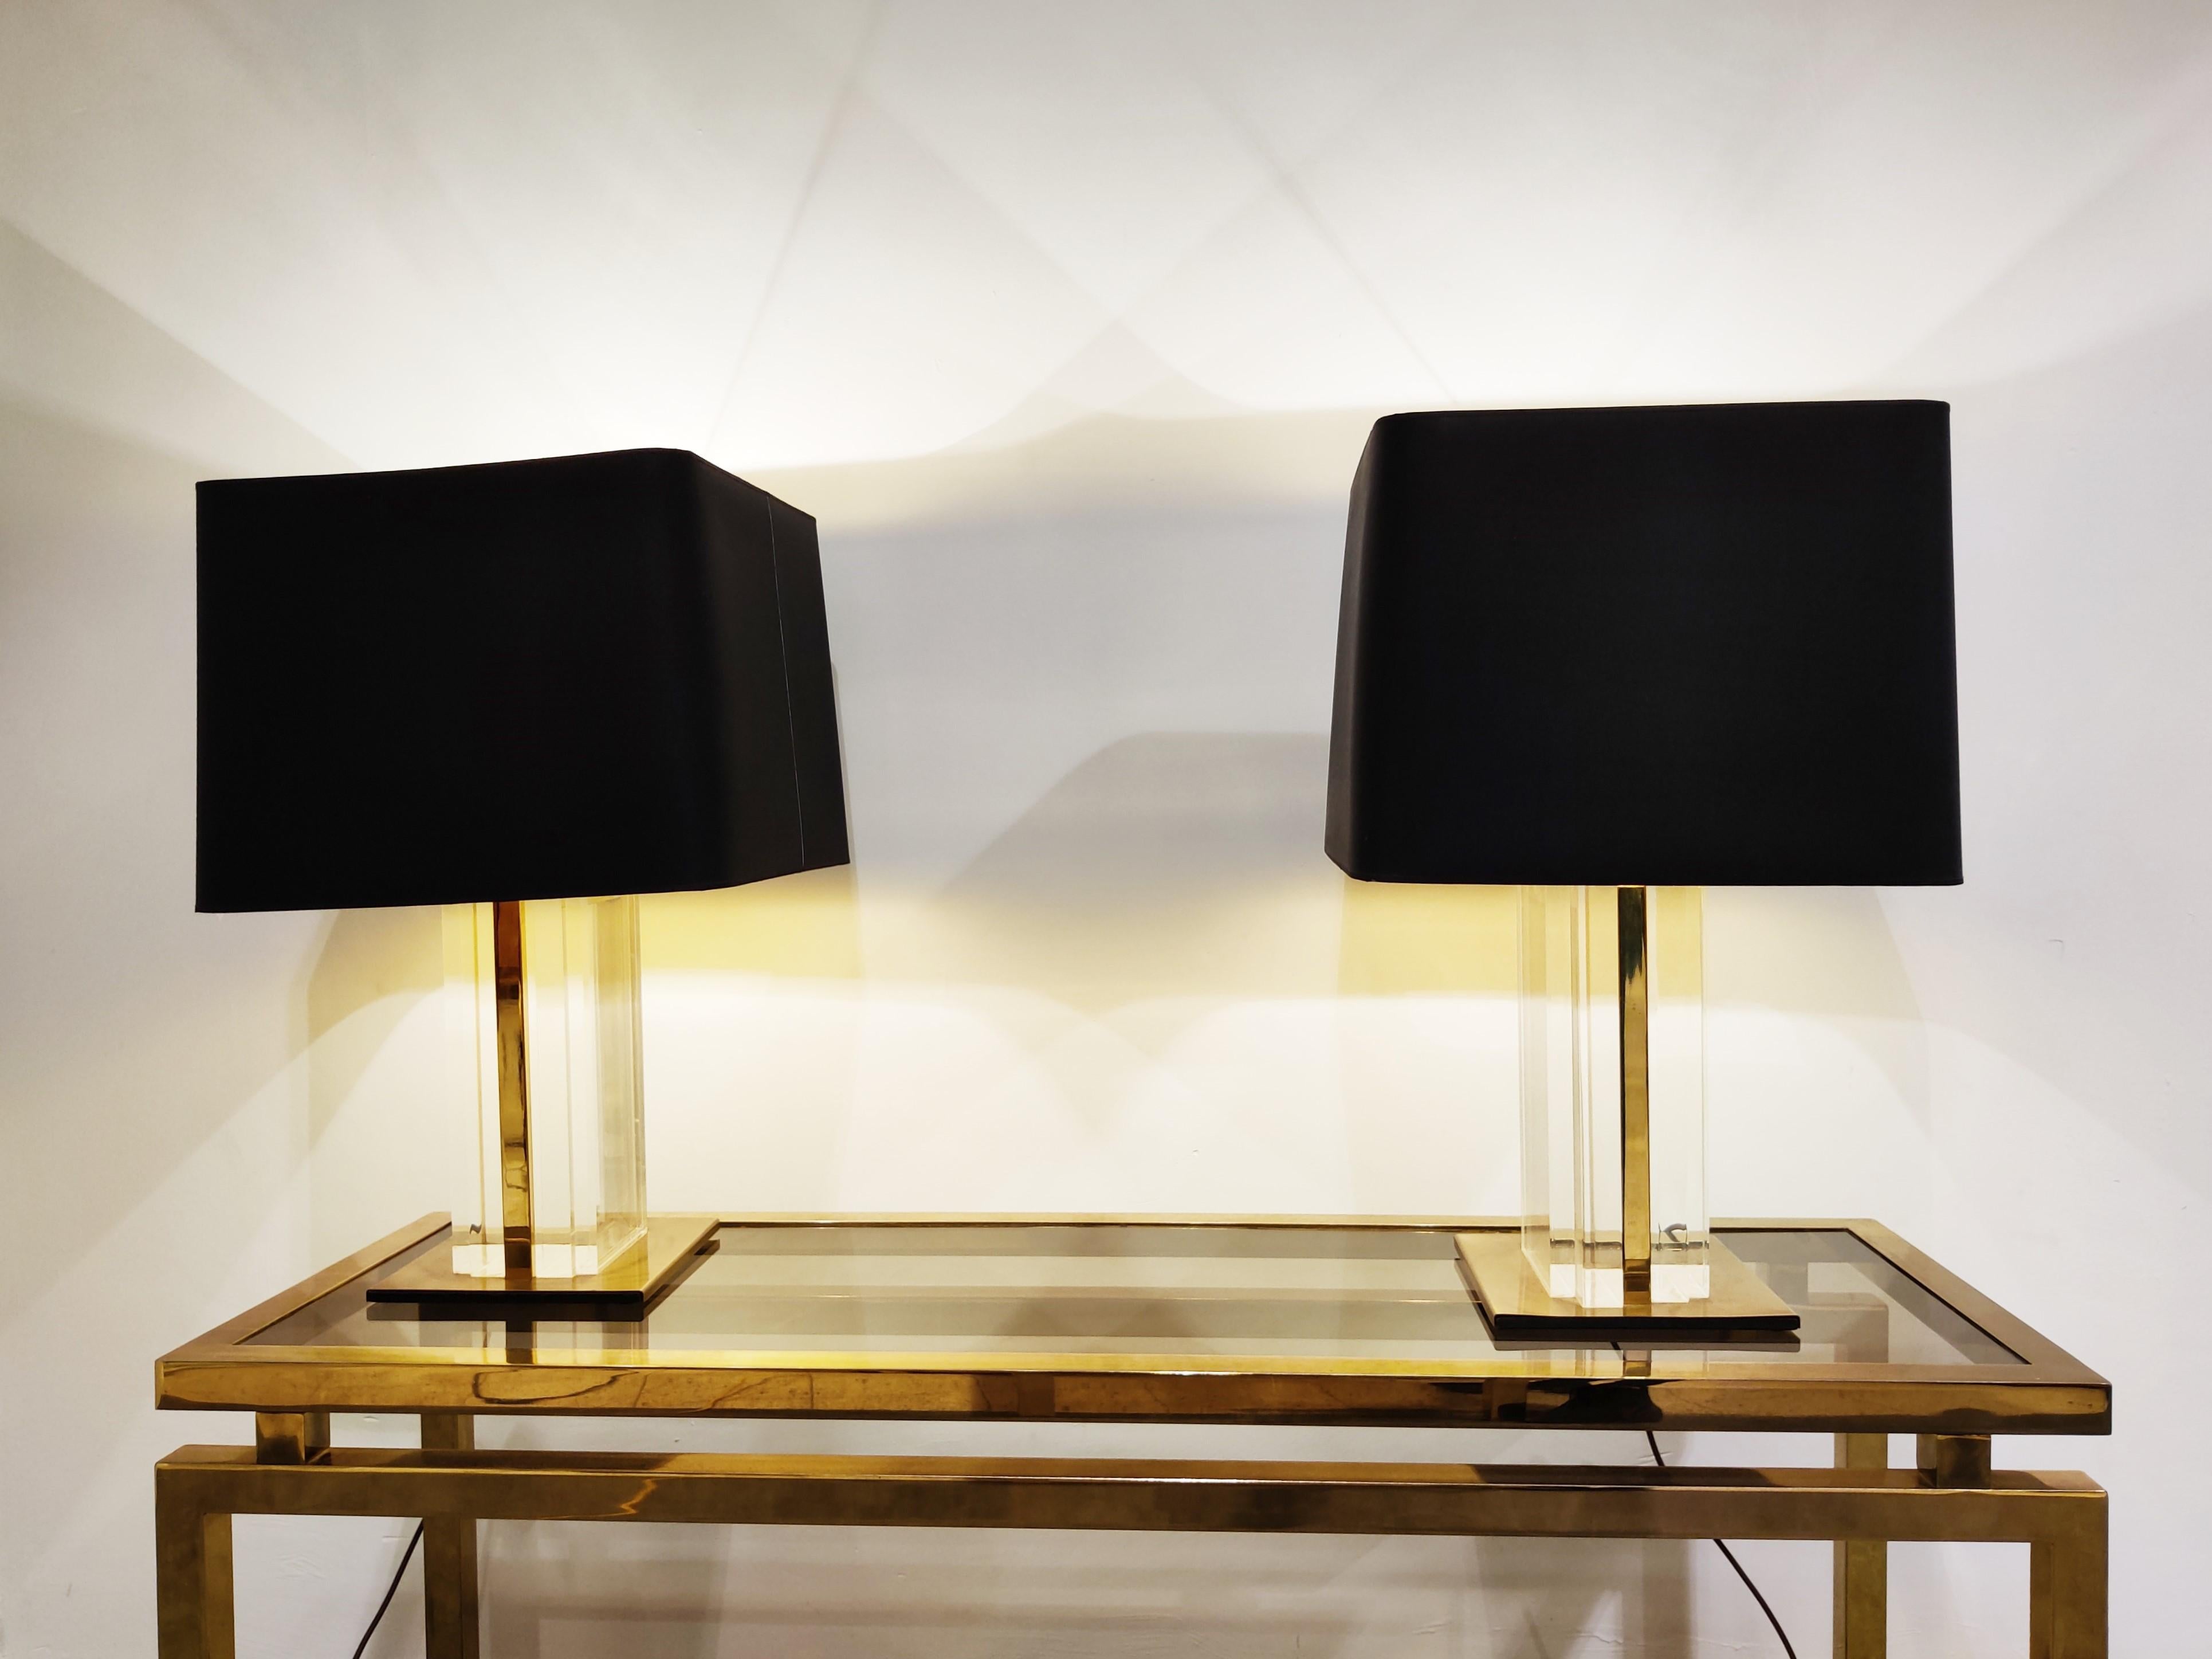 Pair of eye-catching brass and Lucite table lamps by Belgochrom.

The table lamps come with their original black lamp shades.

The lamps are quite large, and as a pair they make a great statement piece on a credenza or side tables.

Good